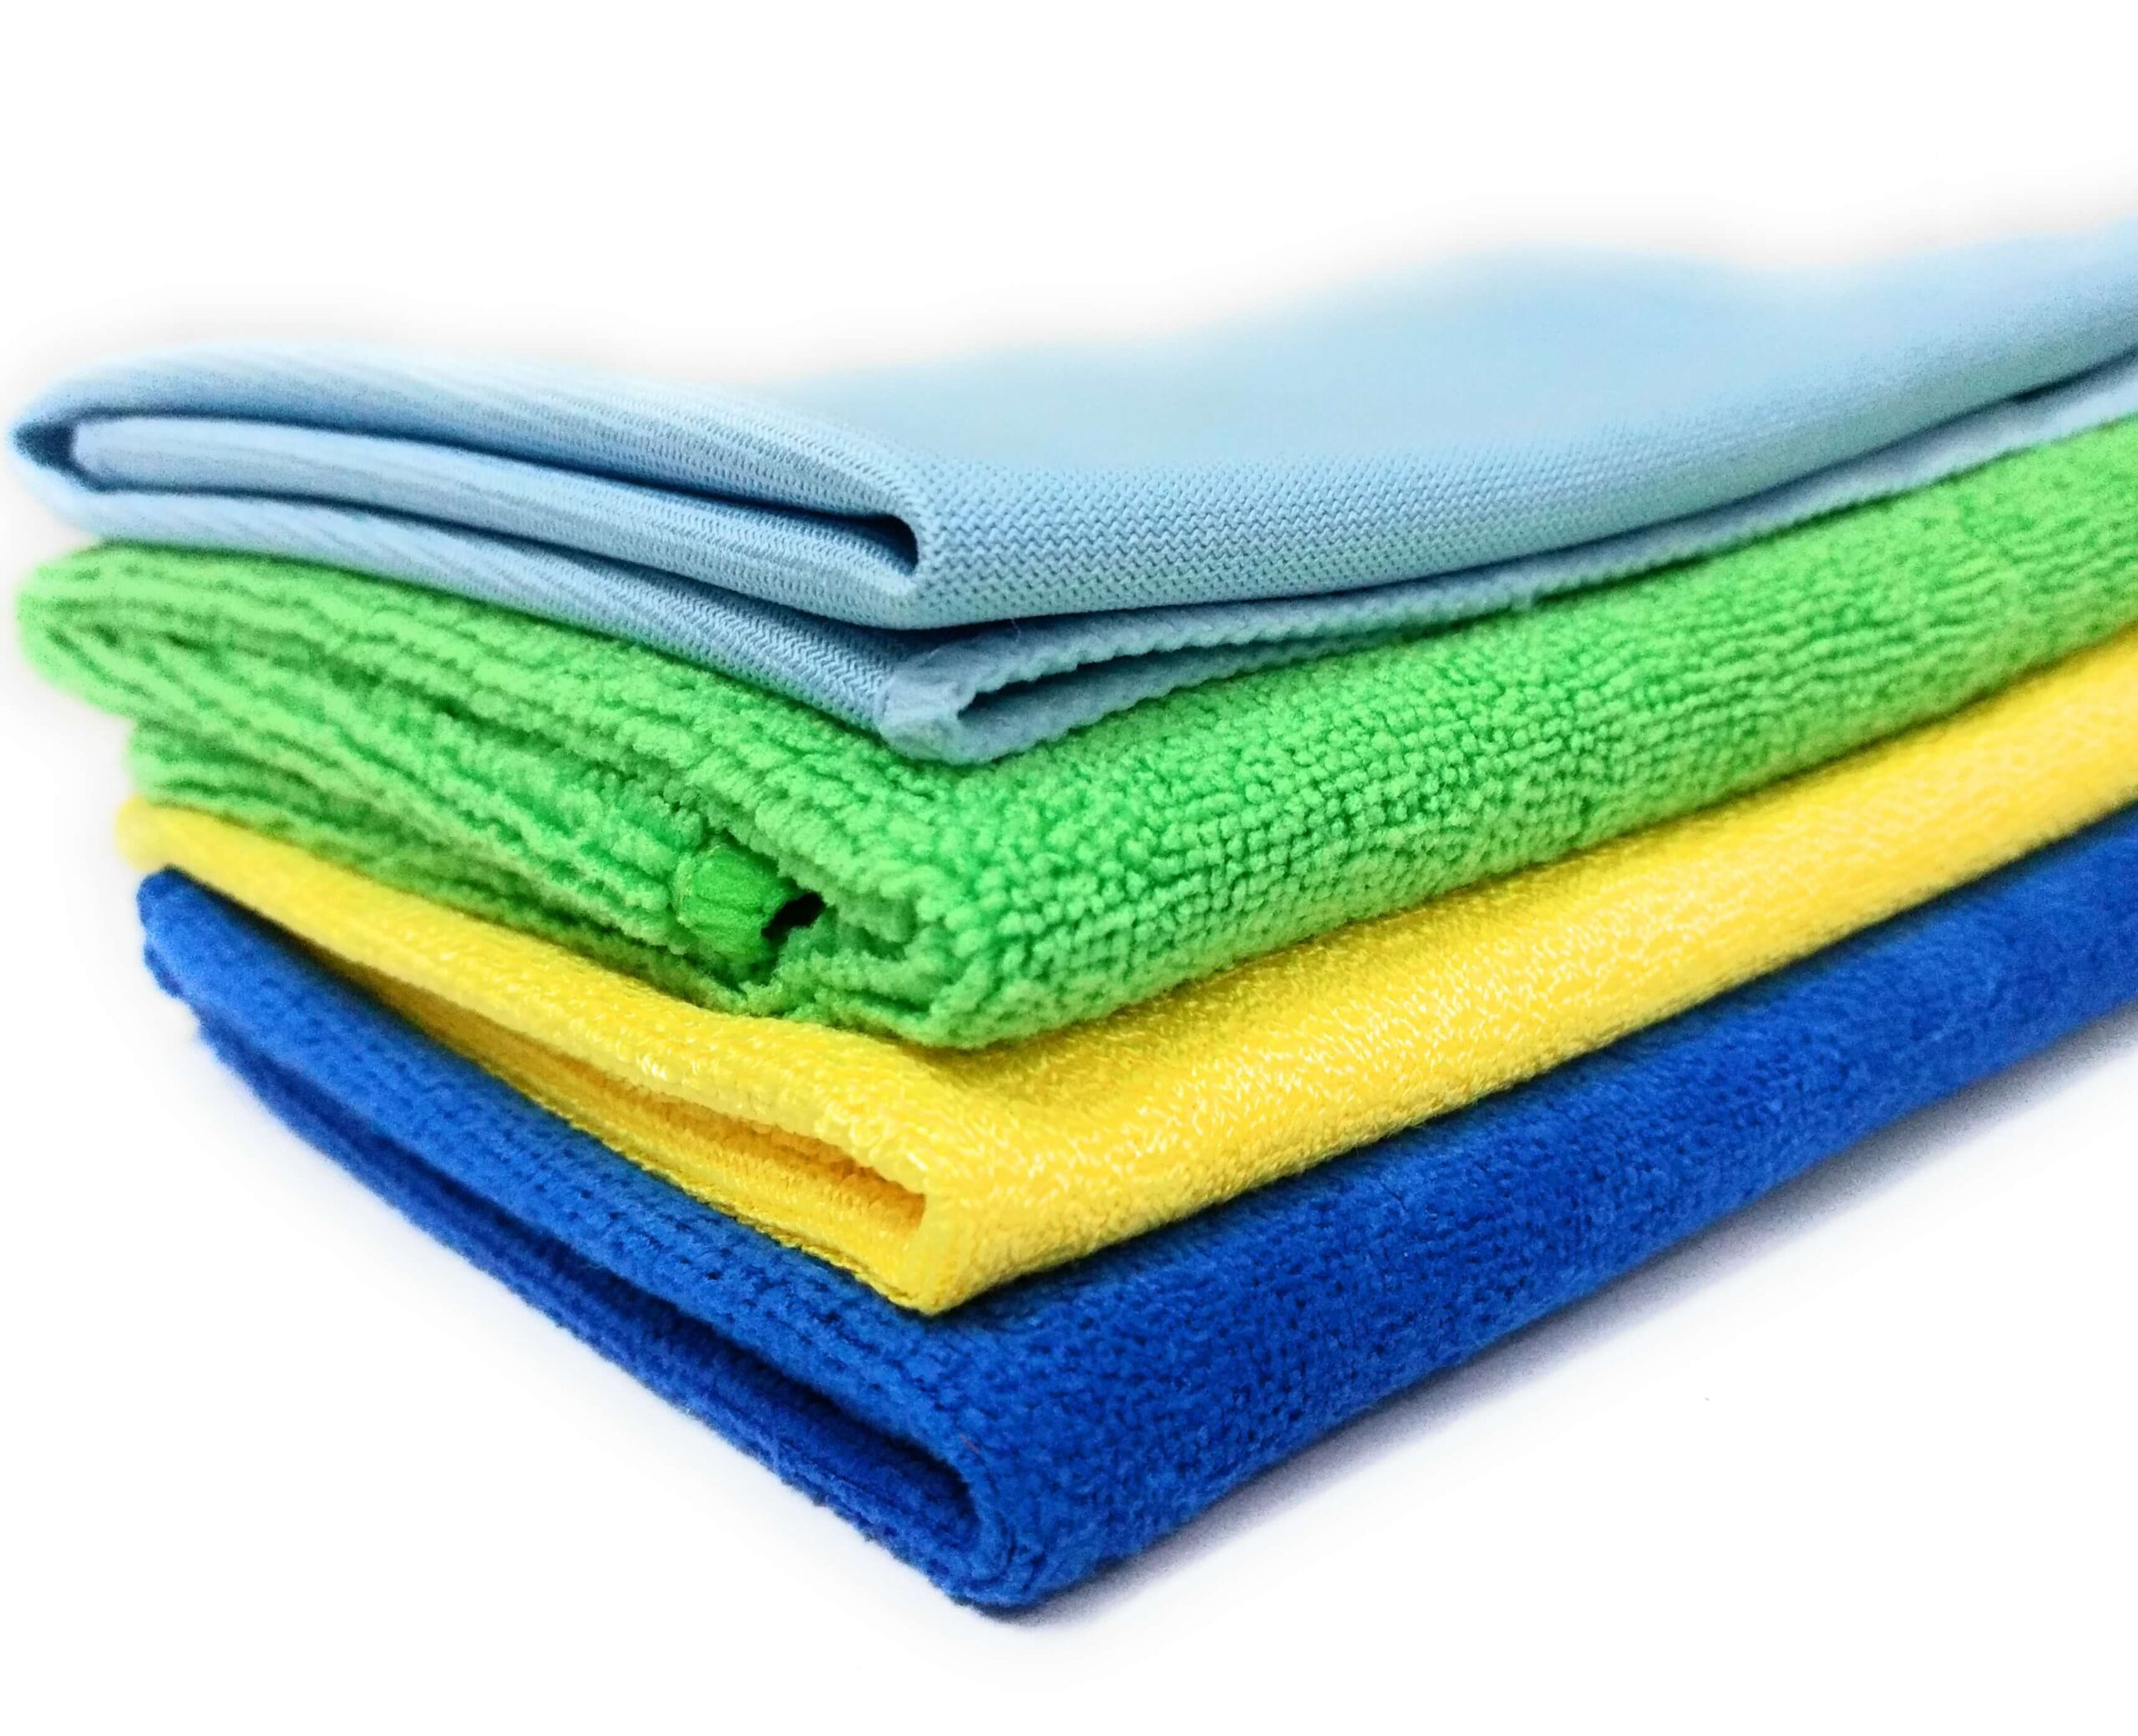 How to choose the best microfiber cloth - Microfiberclothes.com